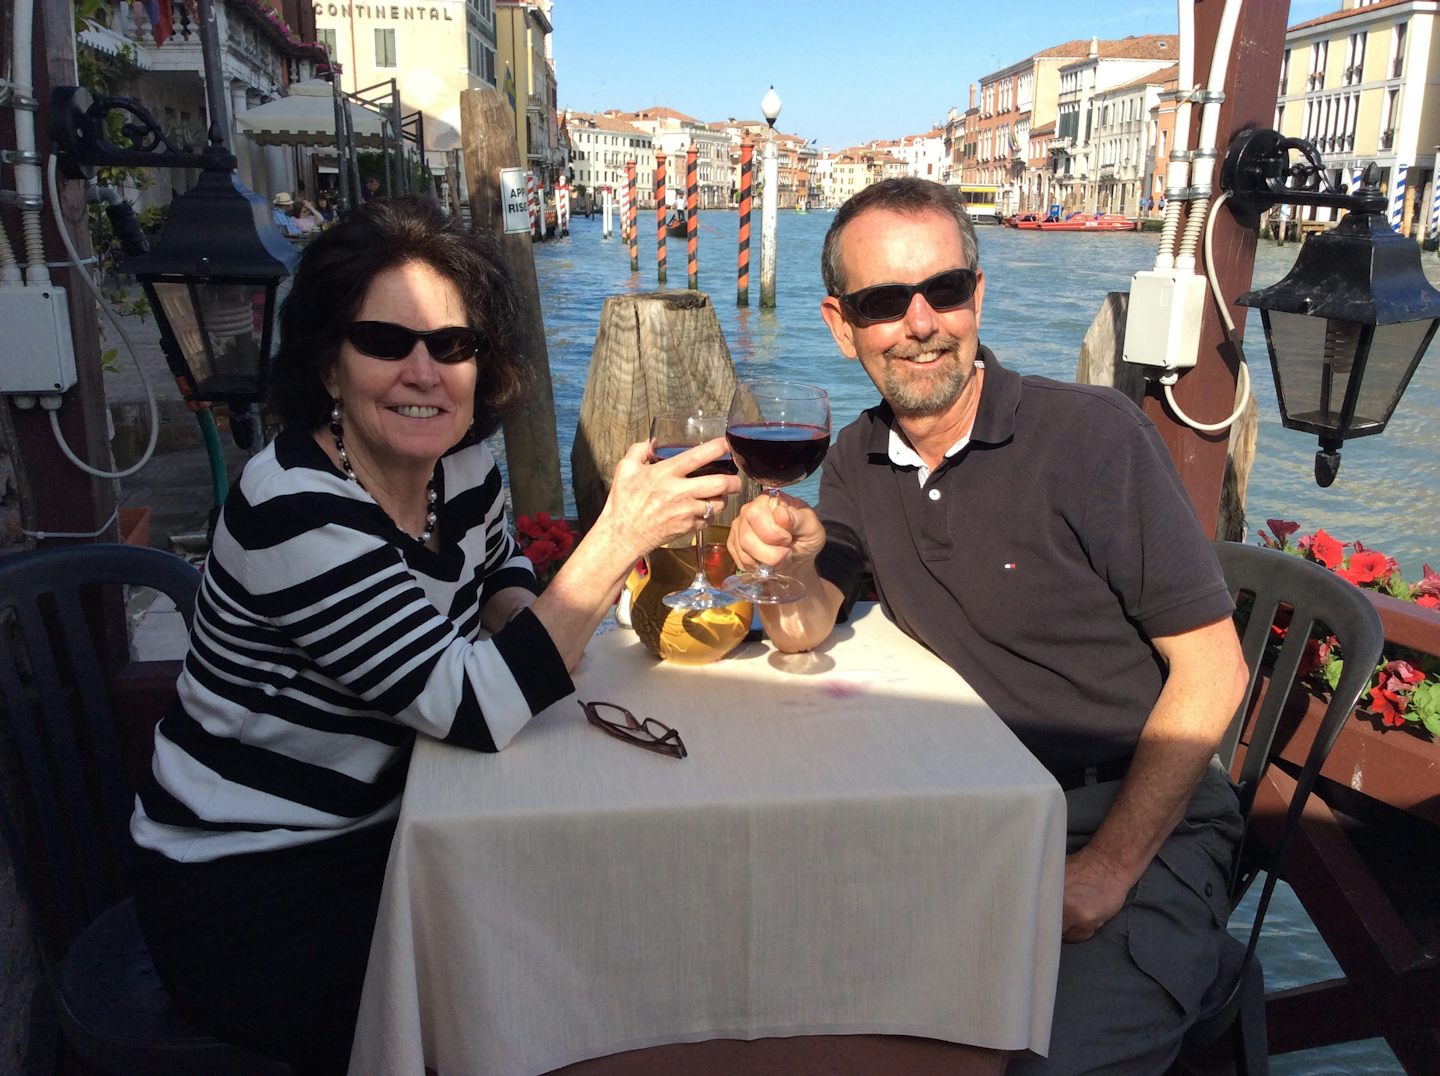 Having lunch and a glass of wine in Venice